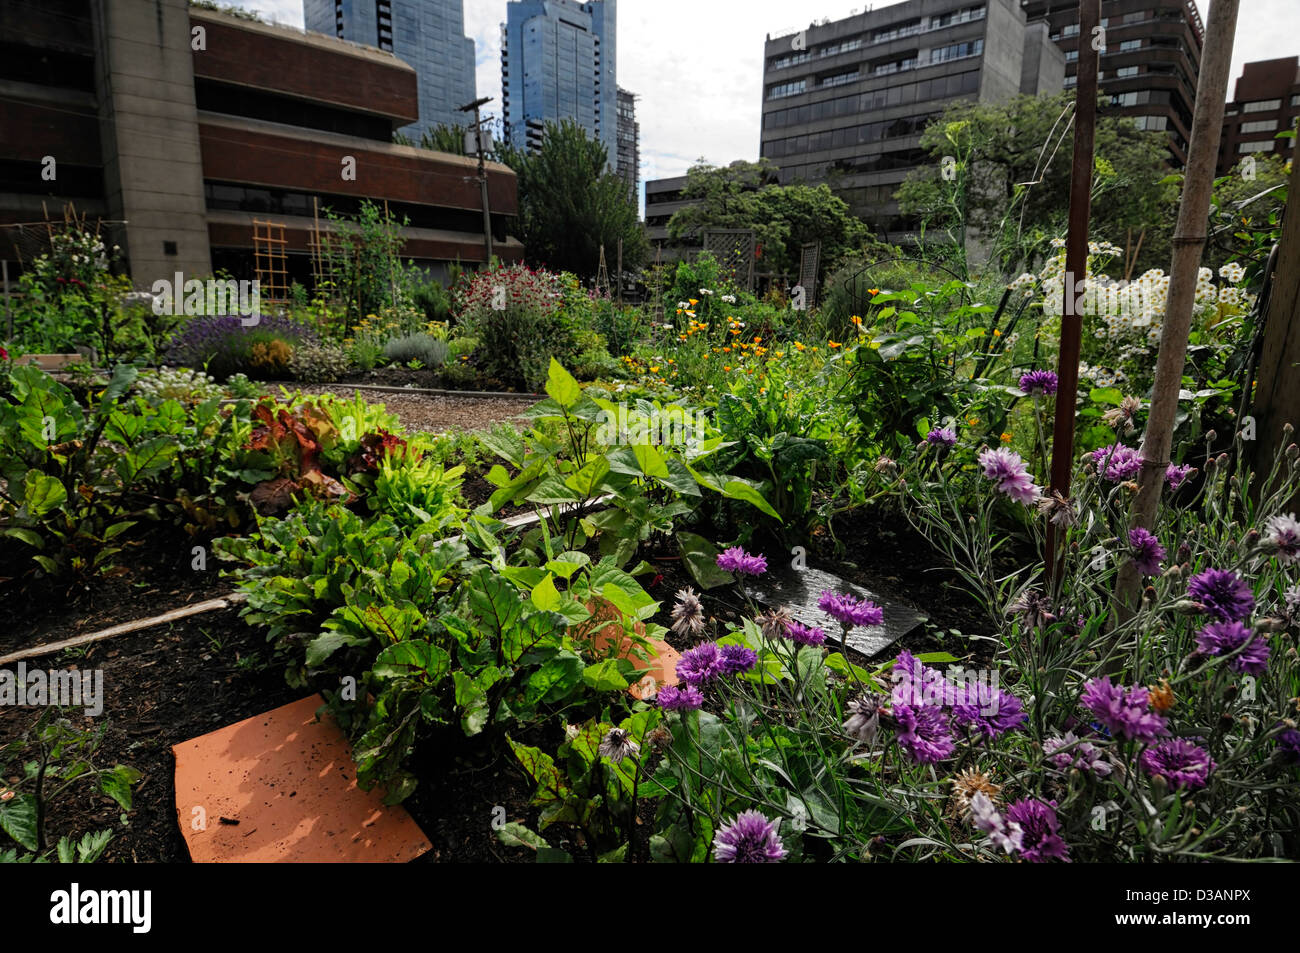 Community Garden High Resolution Stock Photography And Images Alamy